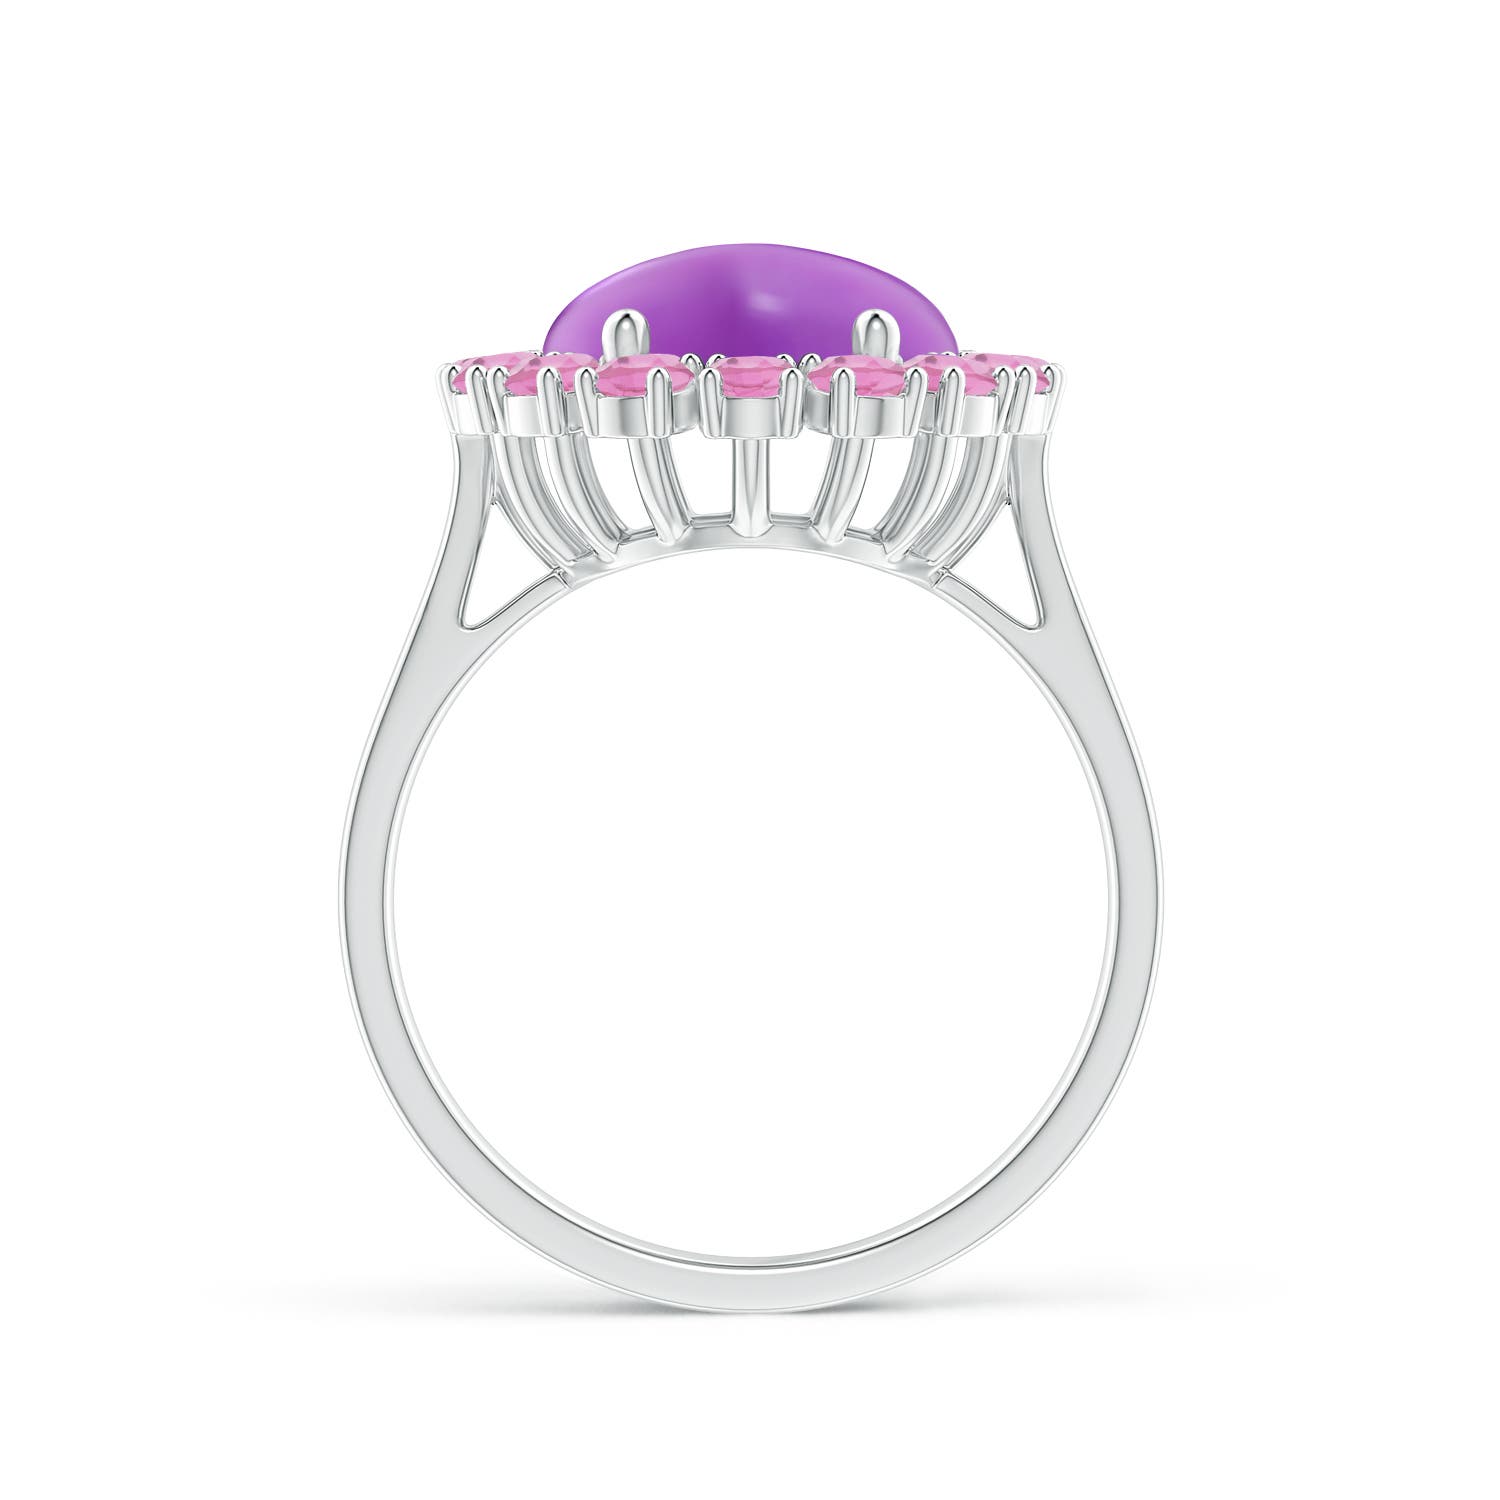 AA - Amethyst / 7.26 CT / 14 KT White Gold